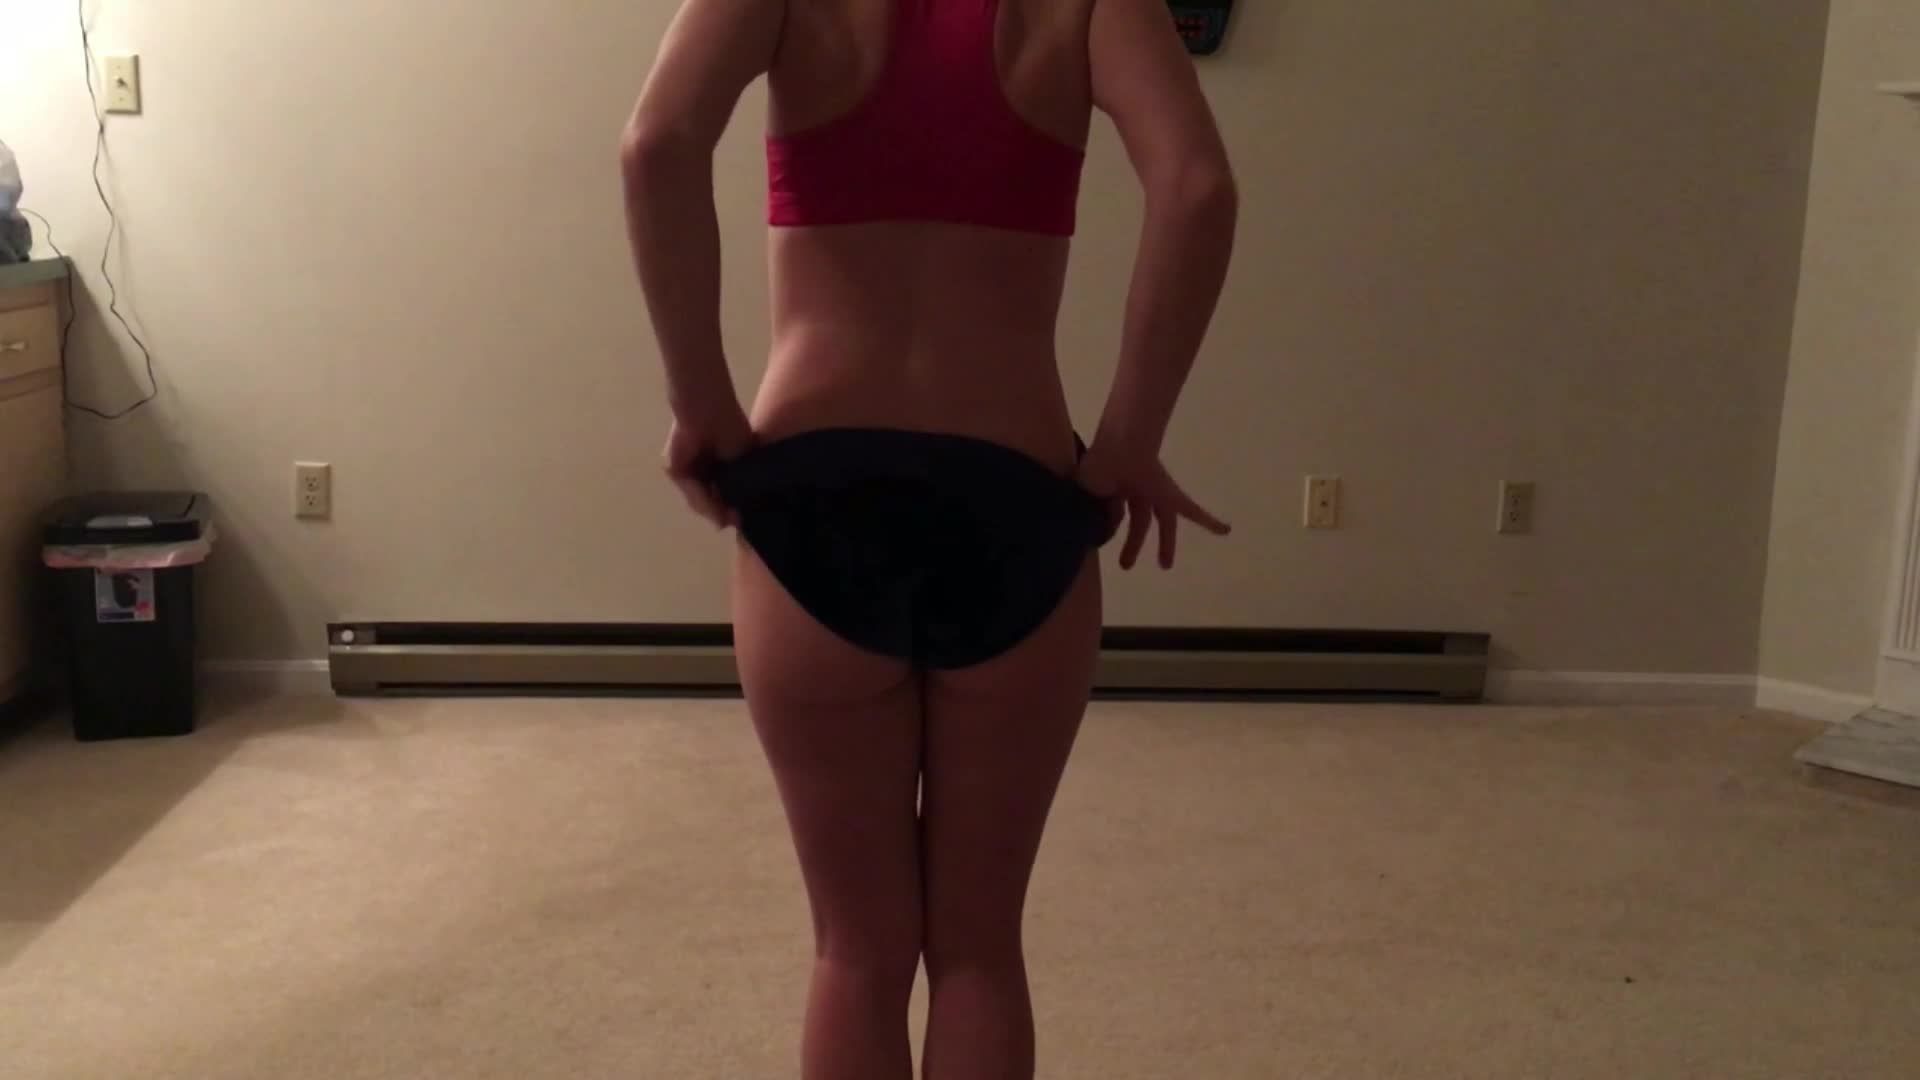 Workout Video with a former gymnast